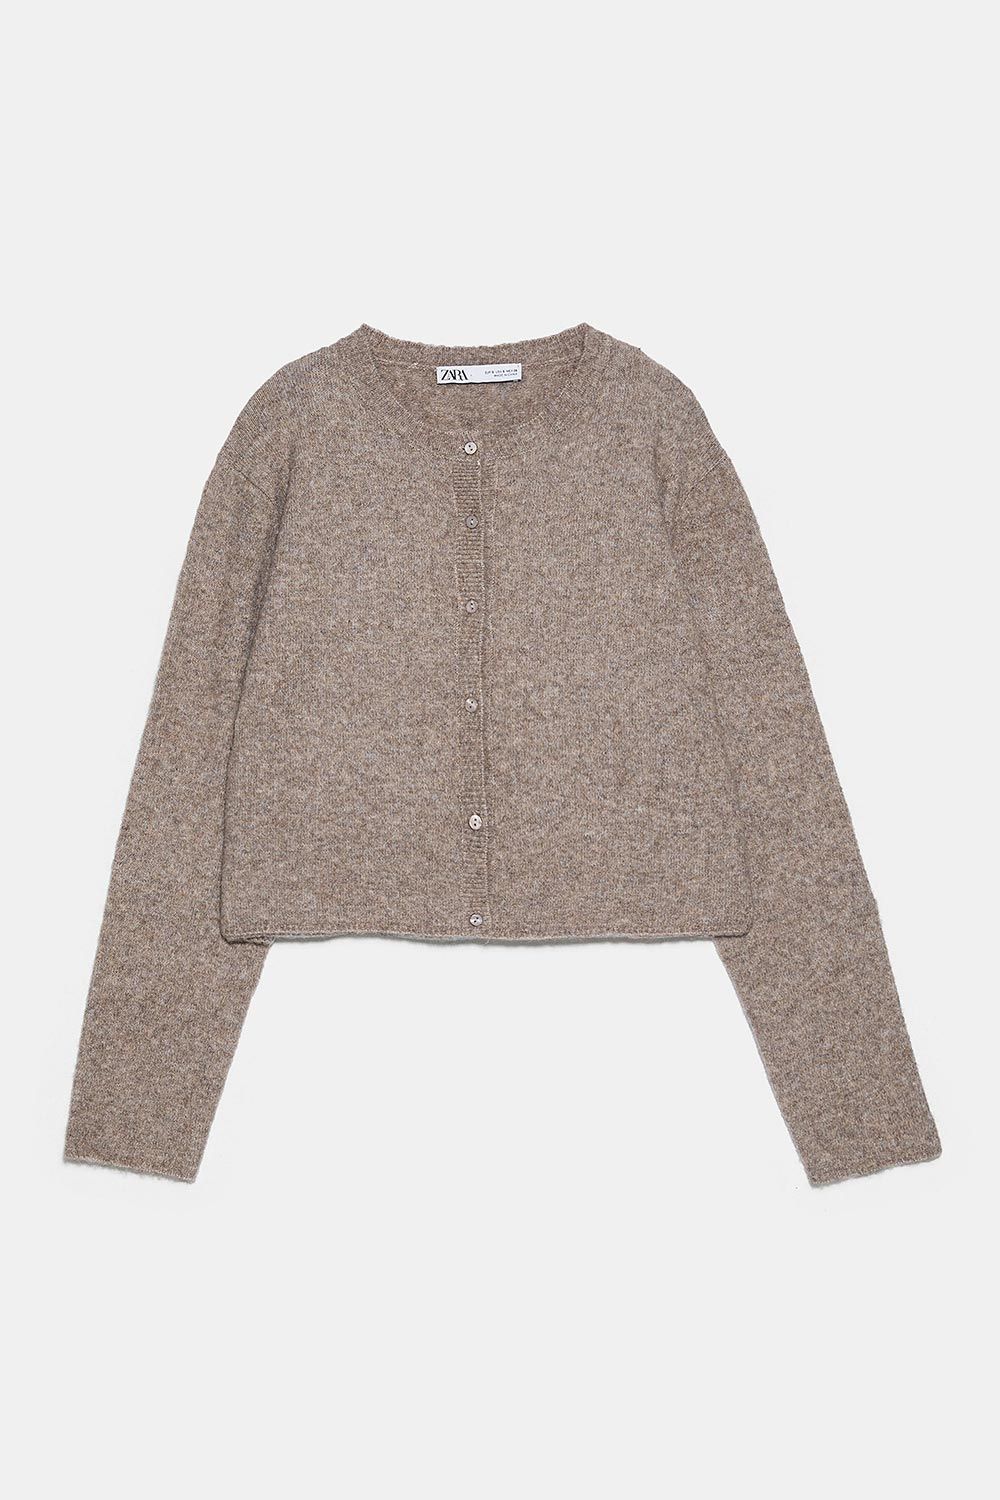 Zara Recreated That Katie Holmes Cardigan & Knitted Bra | Marie Claire UK